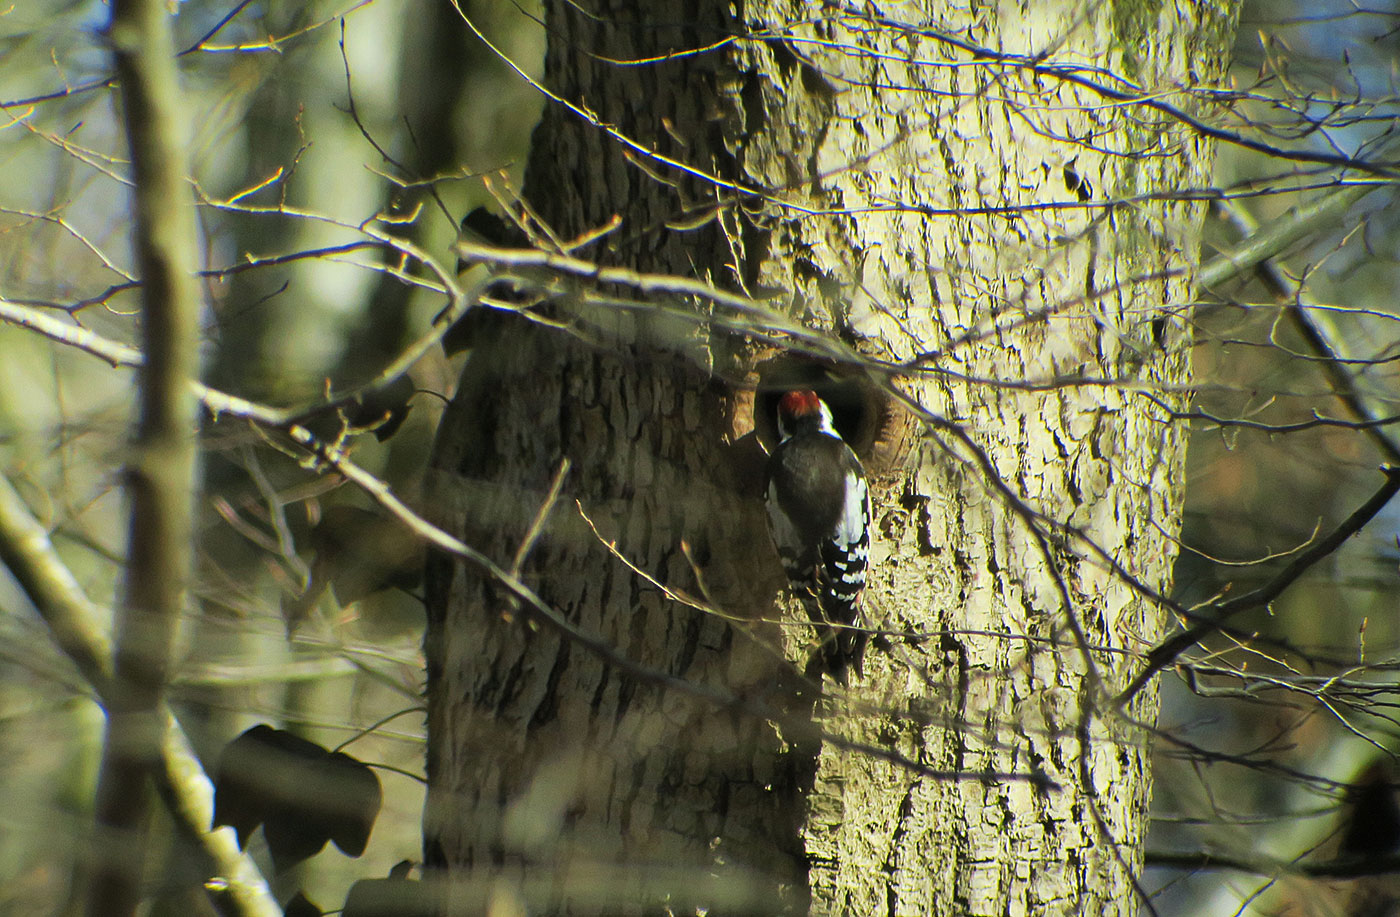 02_mittelspecht_middle-spotted-woodpecker_seeholz_ammersee_2019-02-23_7095